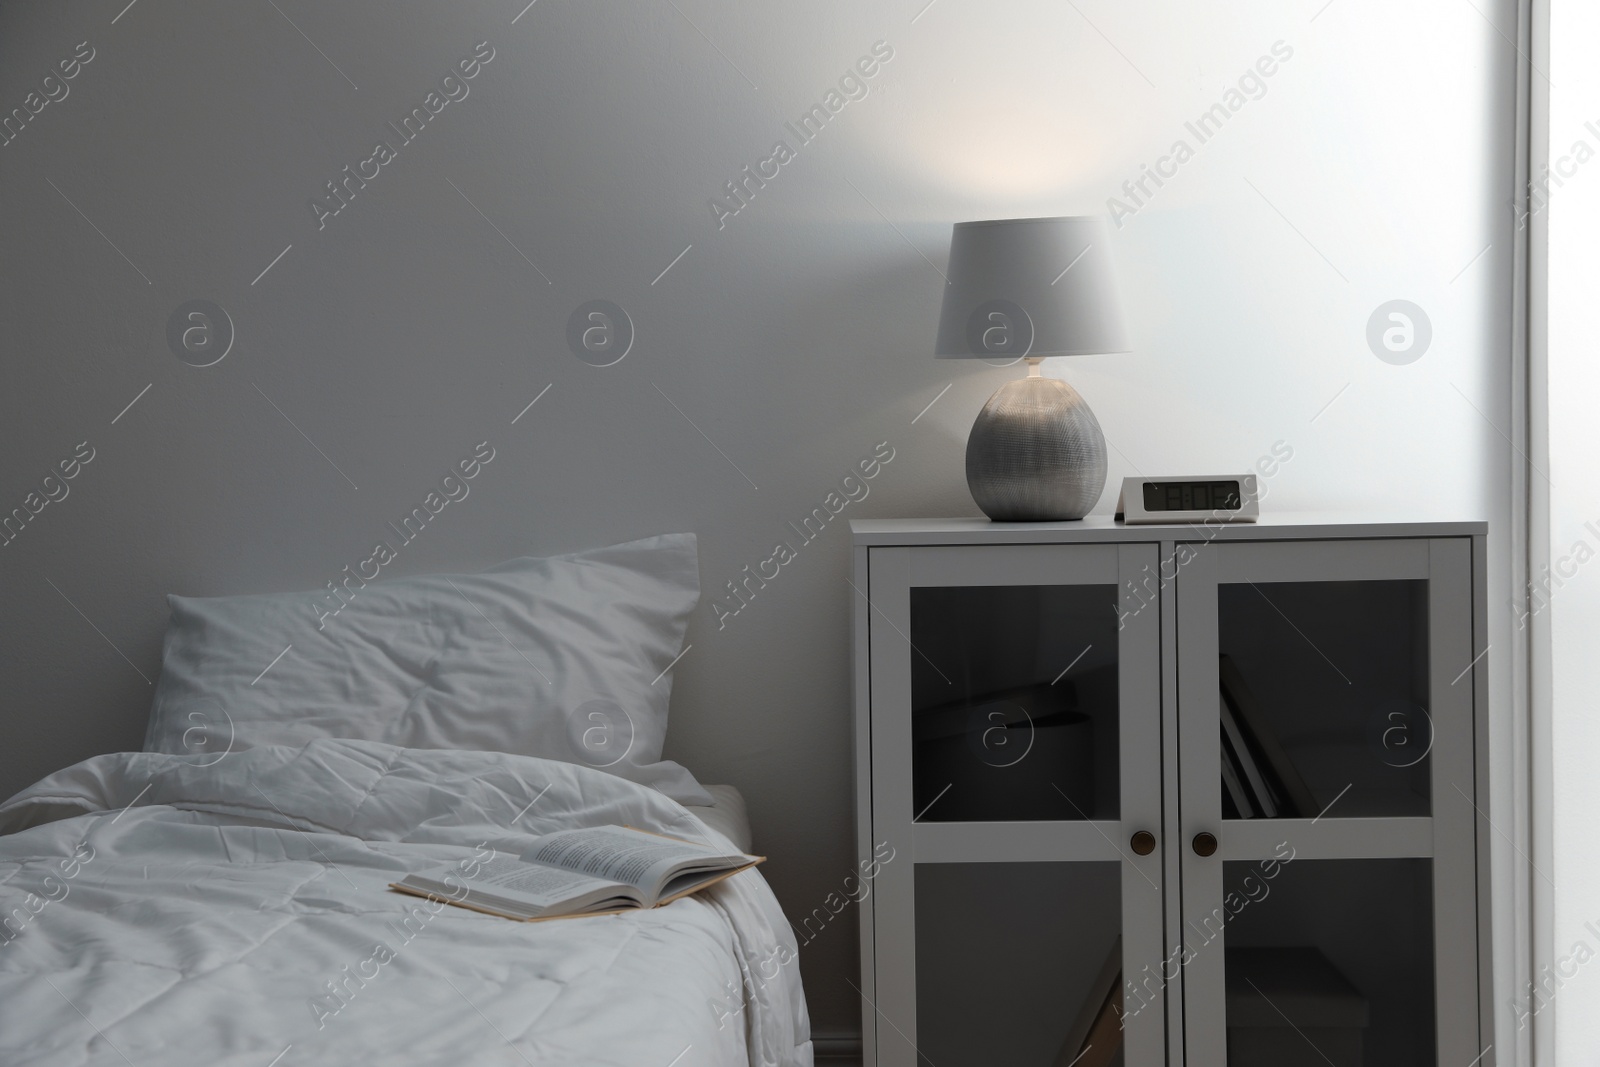 Photo of Stylish lamp and alarm clock on bedside table indoors. Bedroom interior elements